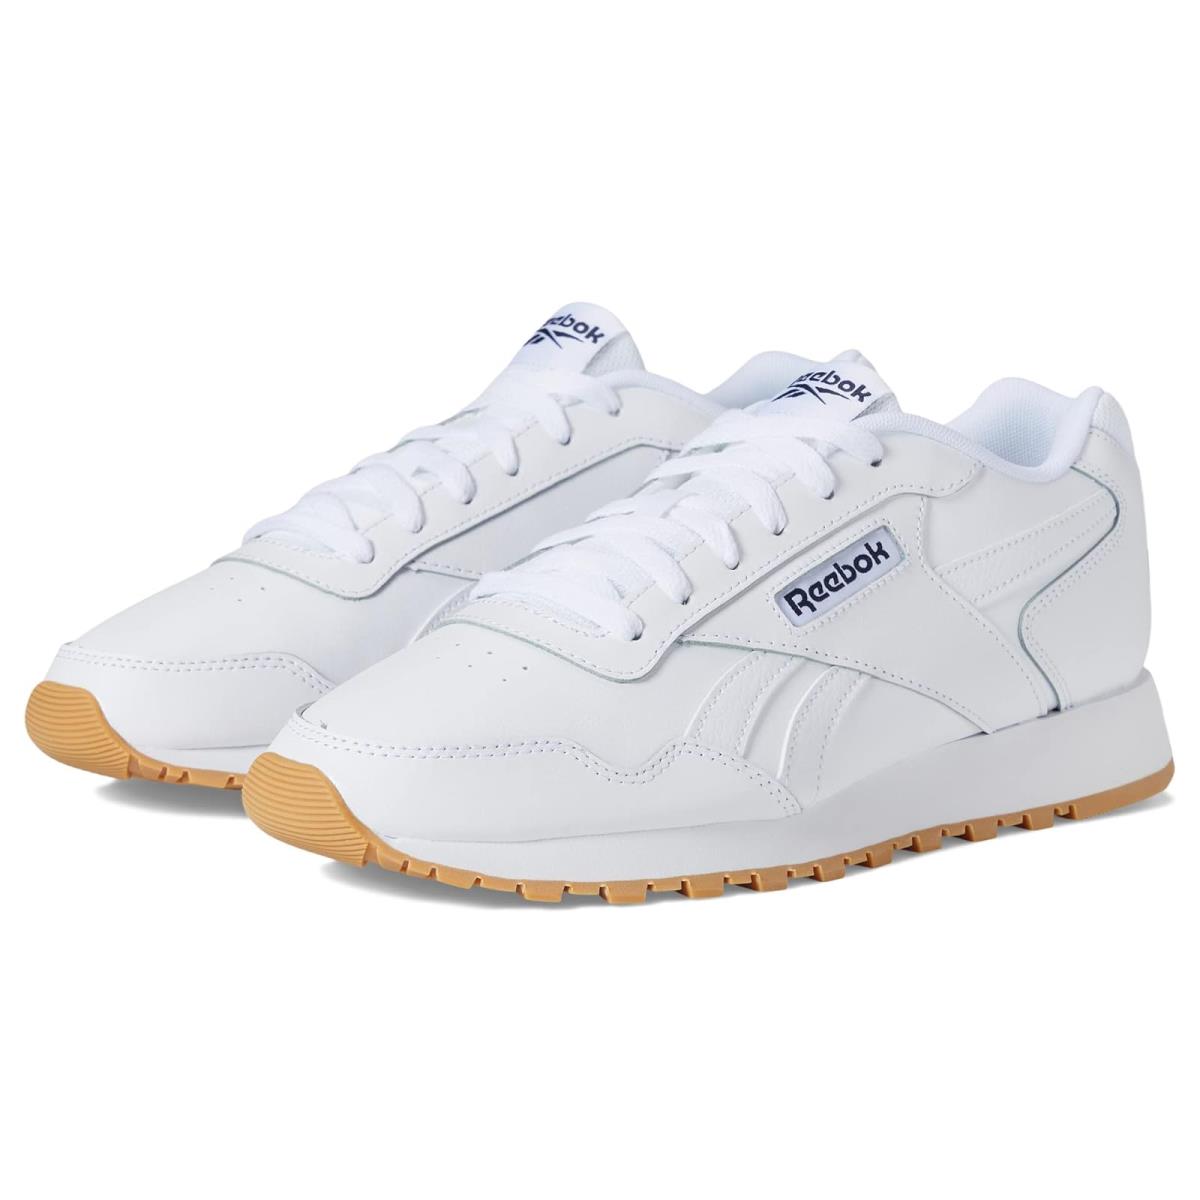 Unisex Sneakers Athletic Shoes Reebok Glide White/Vector Navy/Gum